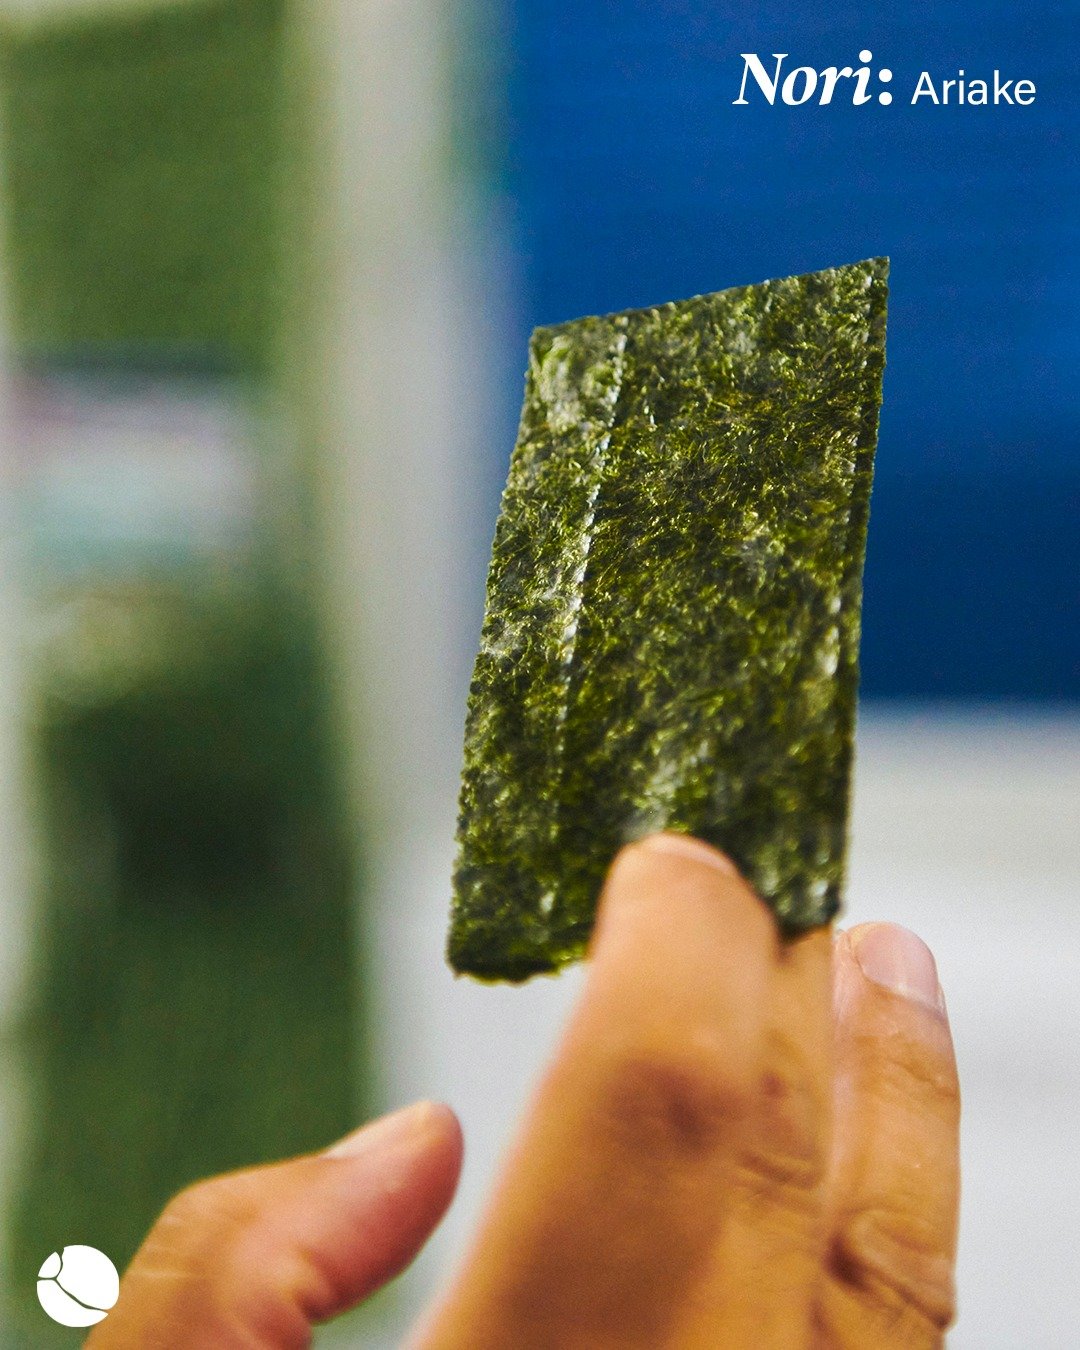 A paper-thin, full-of-flavor cuisine with documents verifying everyday utilization as far back as the Nara period of Japan (710-784), it wasn't until the Edo period that human cultivation of nori seaweed started in full. Seeding begins at the end of 